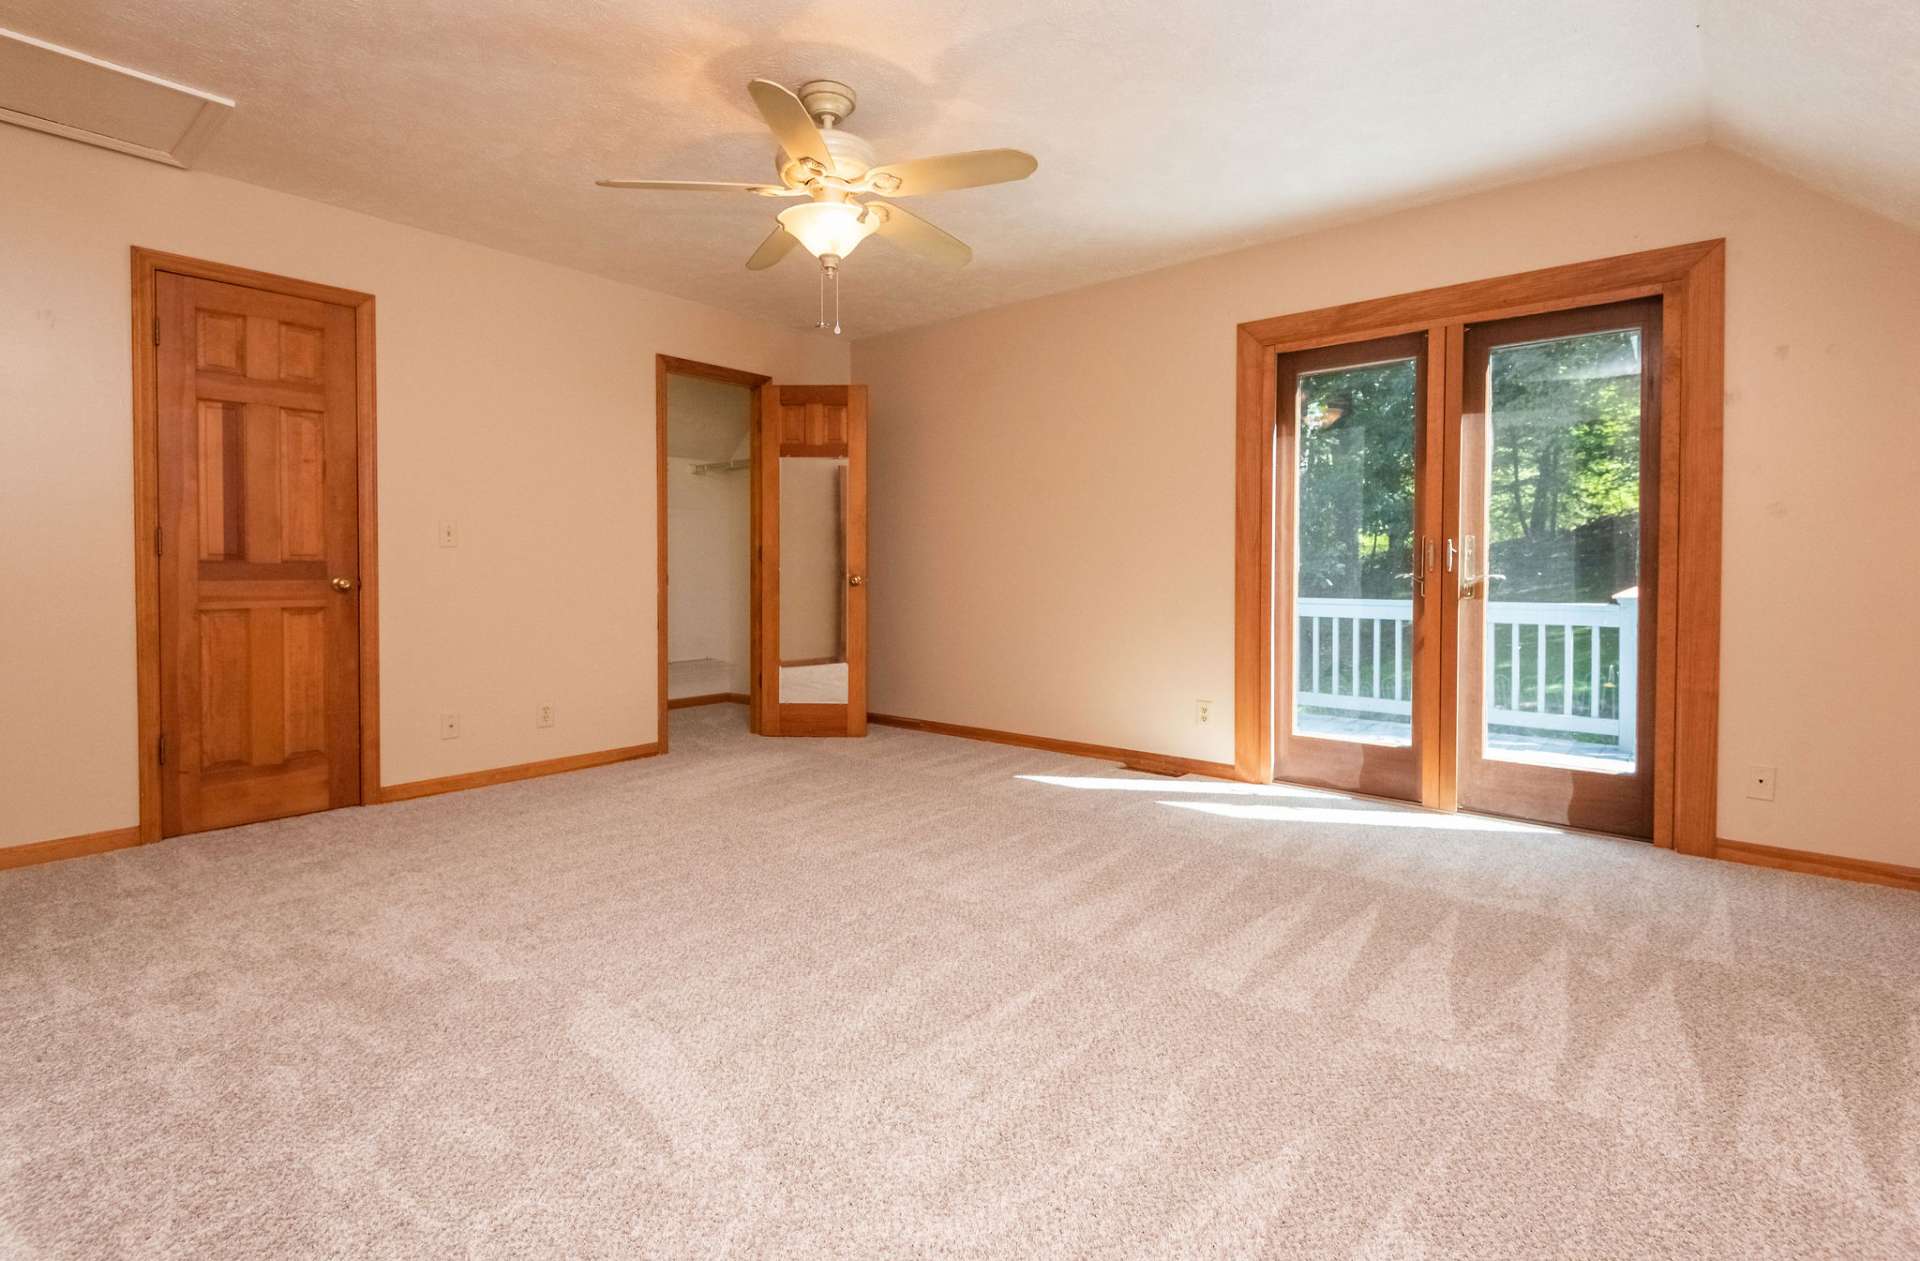 All carpet throughout the home was updated in August of 2022.